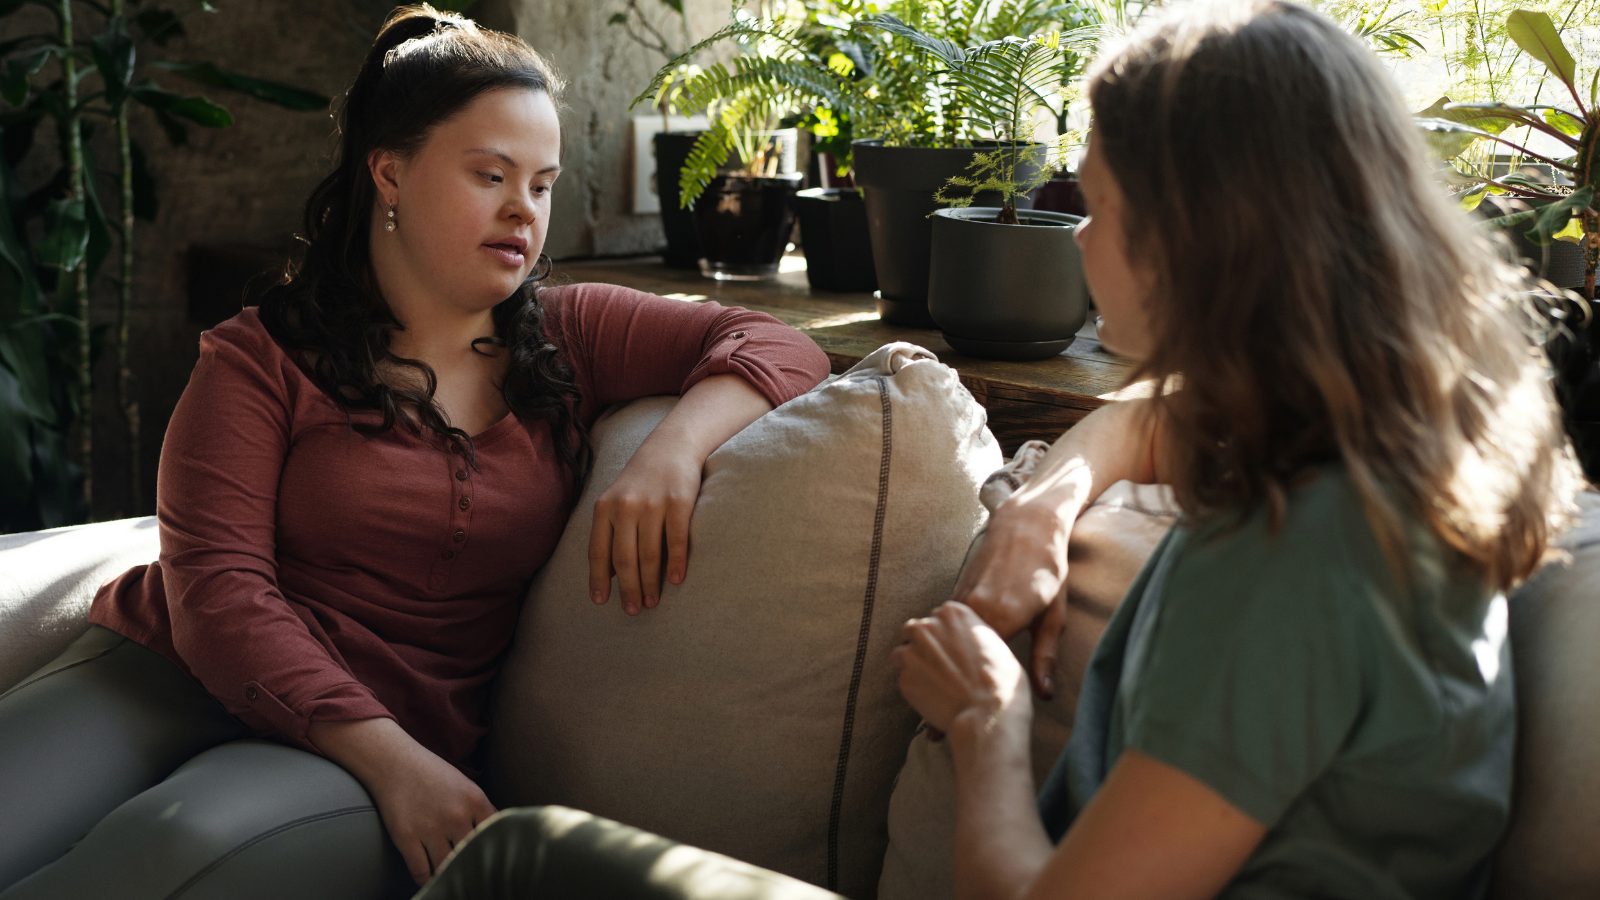 A picture containing a person with down syndrome sitting on sofa with another person